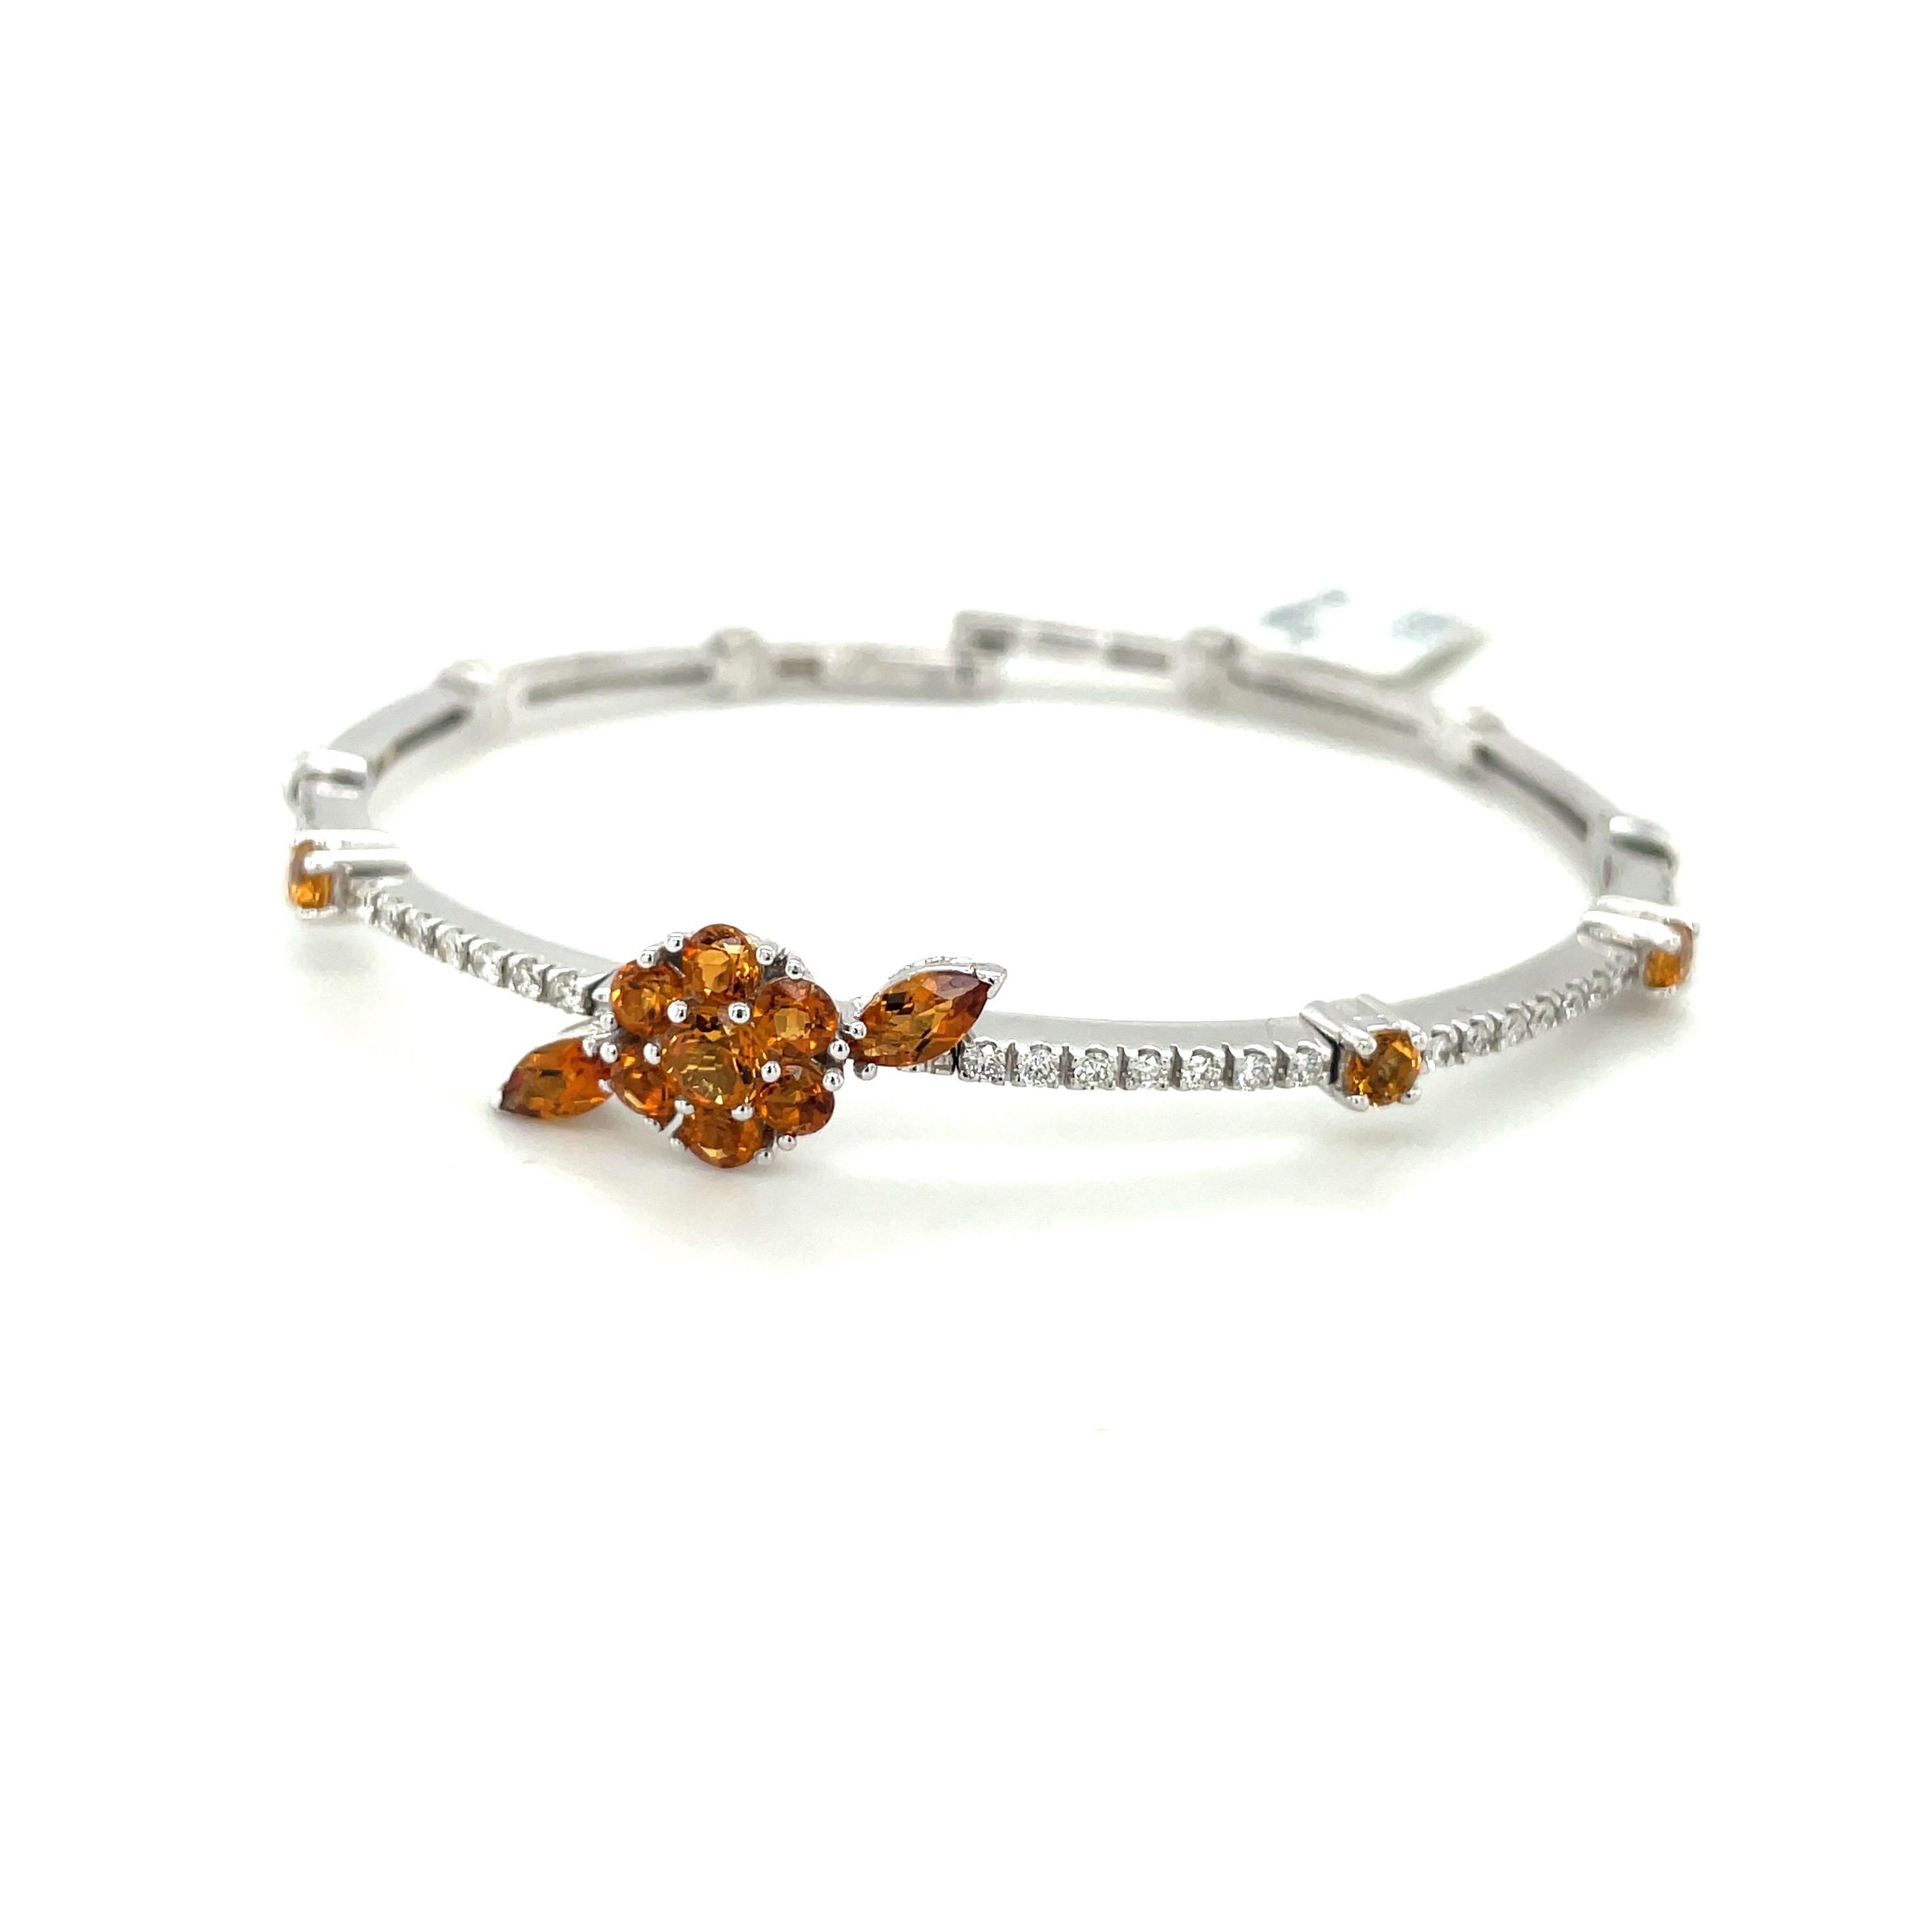 This beautiful flexible open back 18kt white gold bangle features a beautiful citrine flower, totaling 0.30 cts, accented with 0.40 cts of white diamonds. The flexibility of the bangles makes these suitable for a wide range of wrist sizes and the